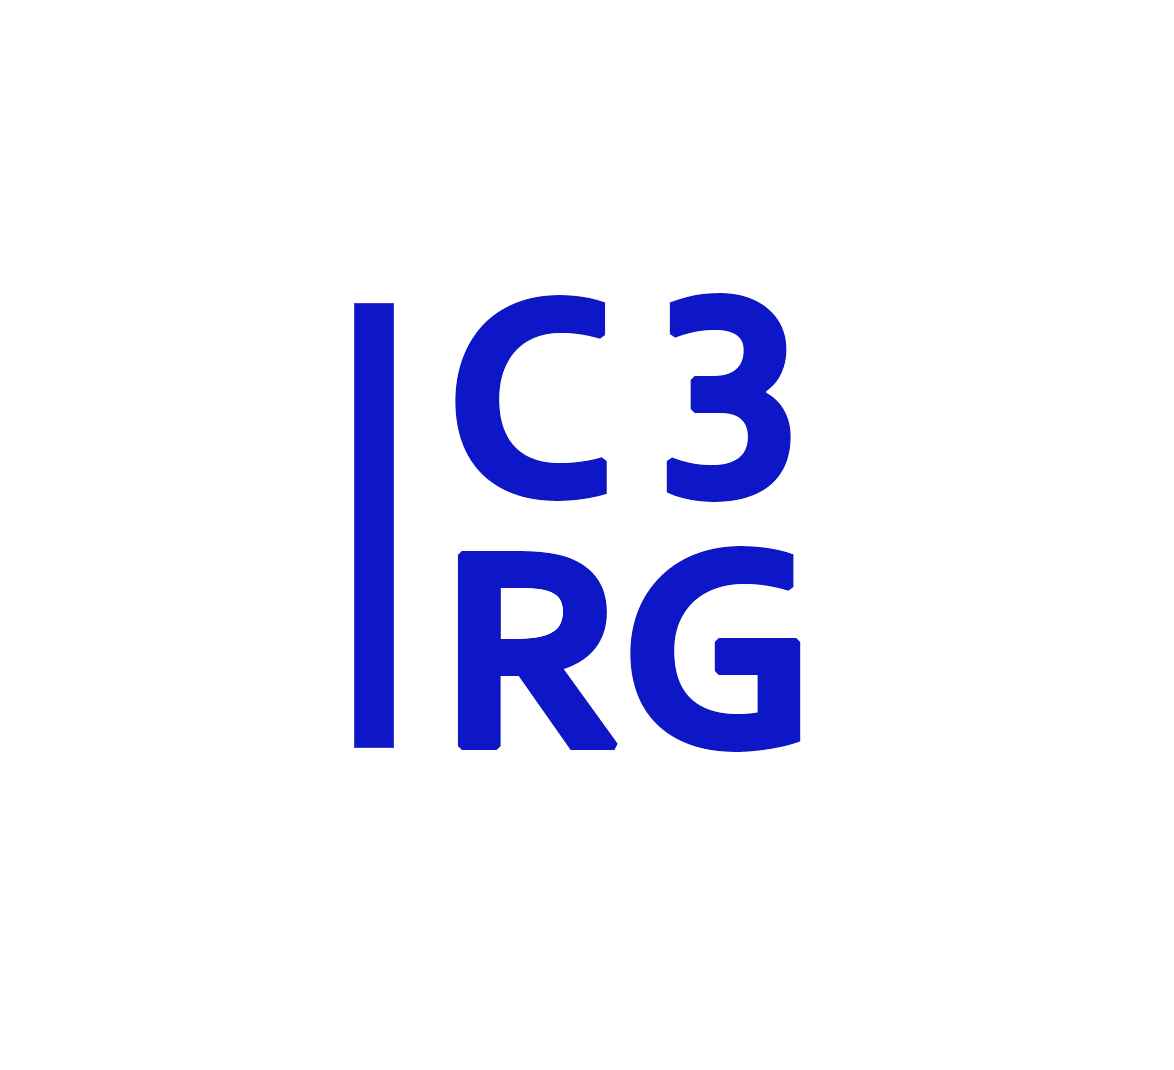 Logo with the text "ic3irg" in blue uppercase letters on a black background.